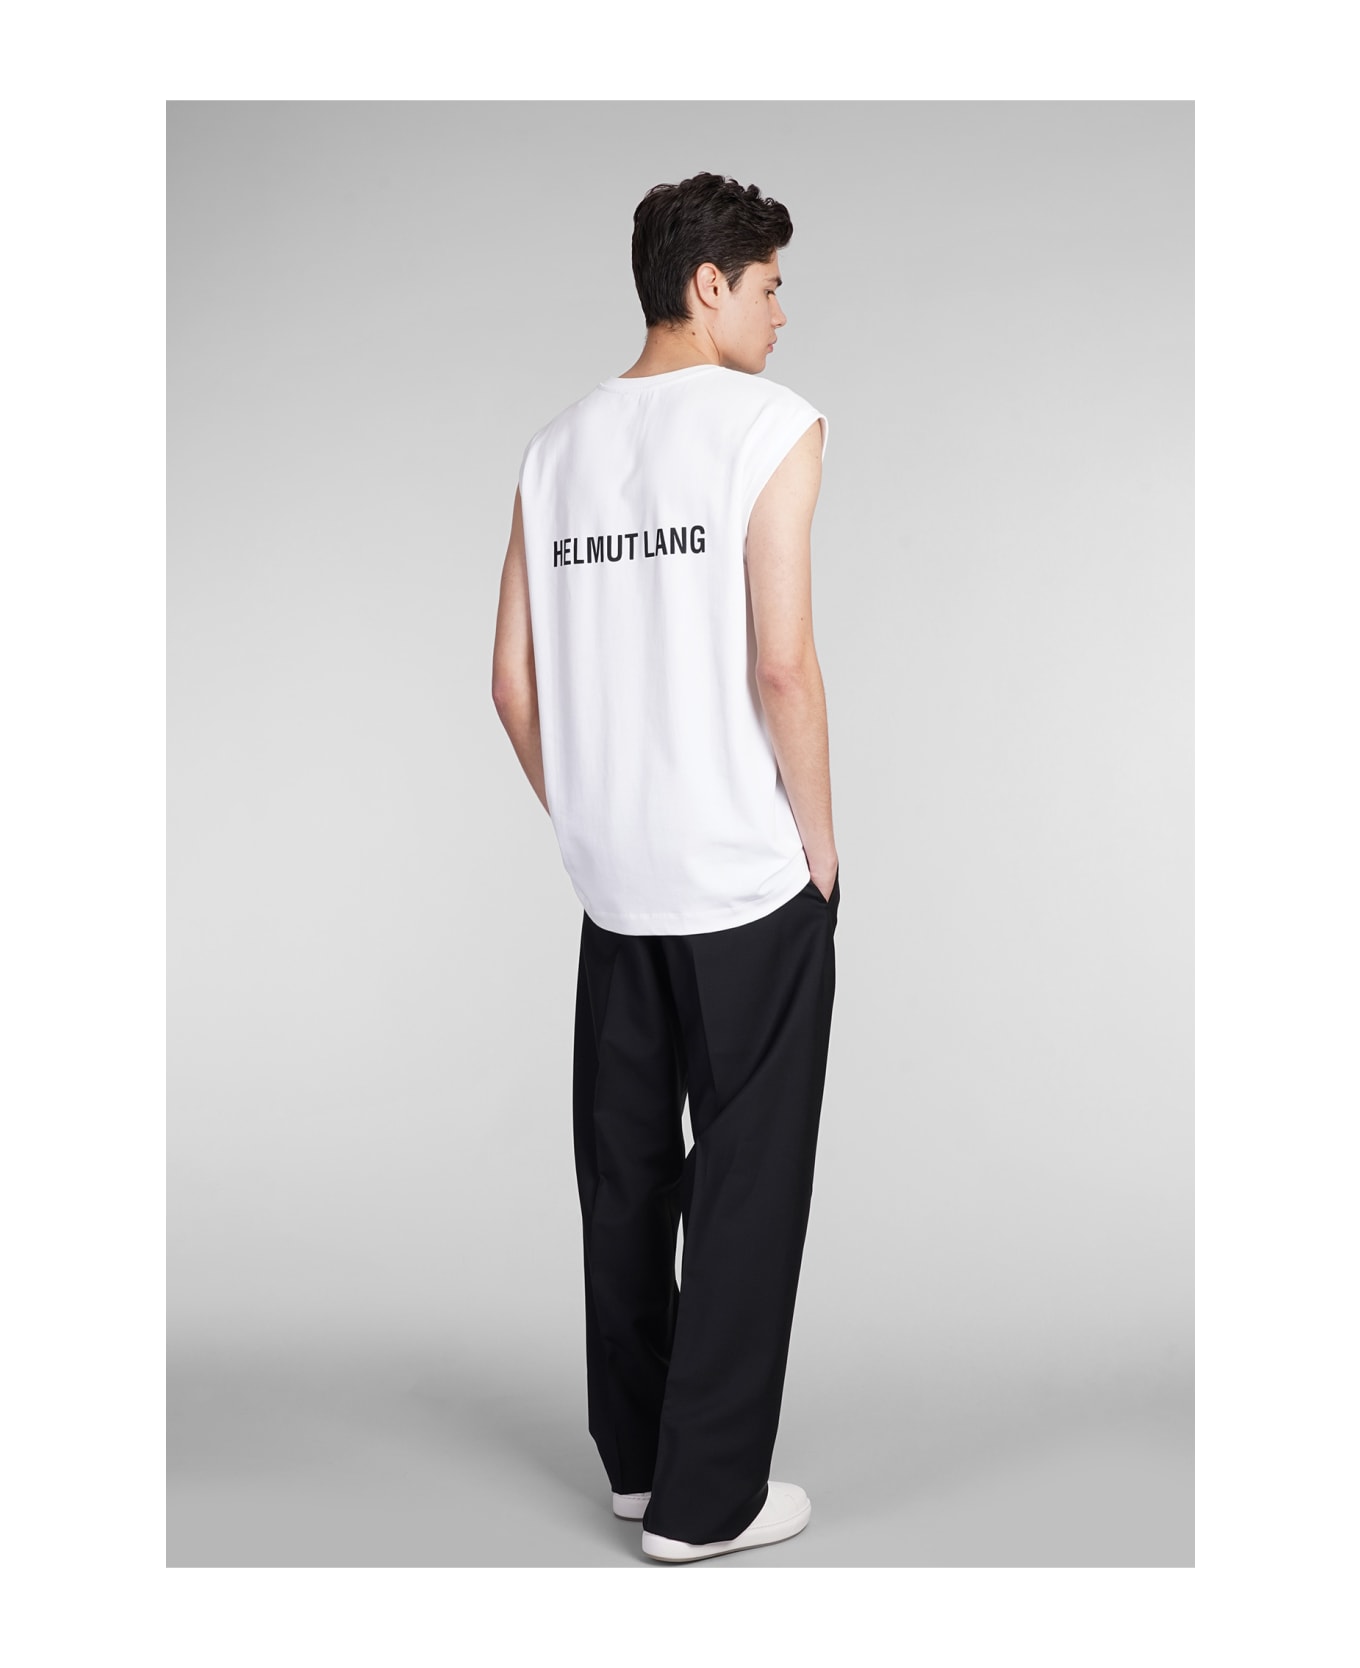 Helmut Lang Tank Top In White Cotton - white